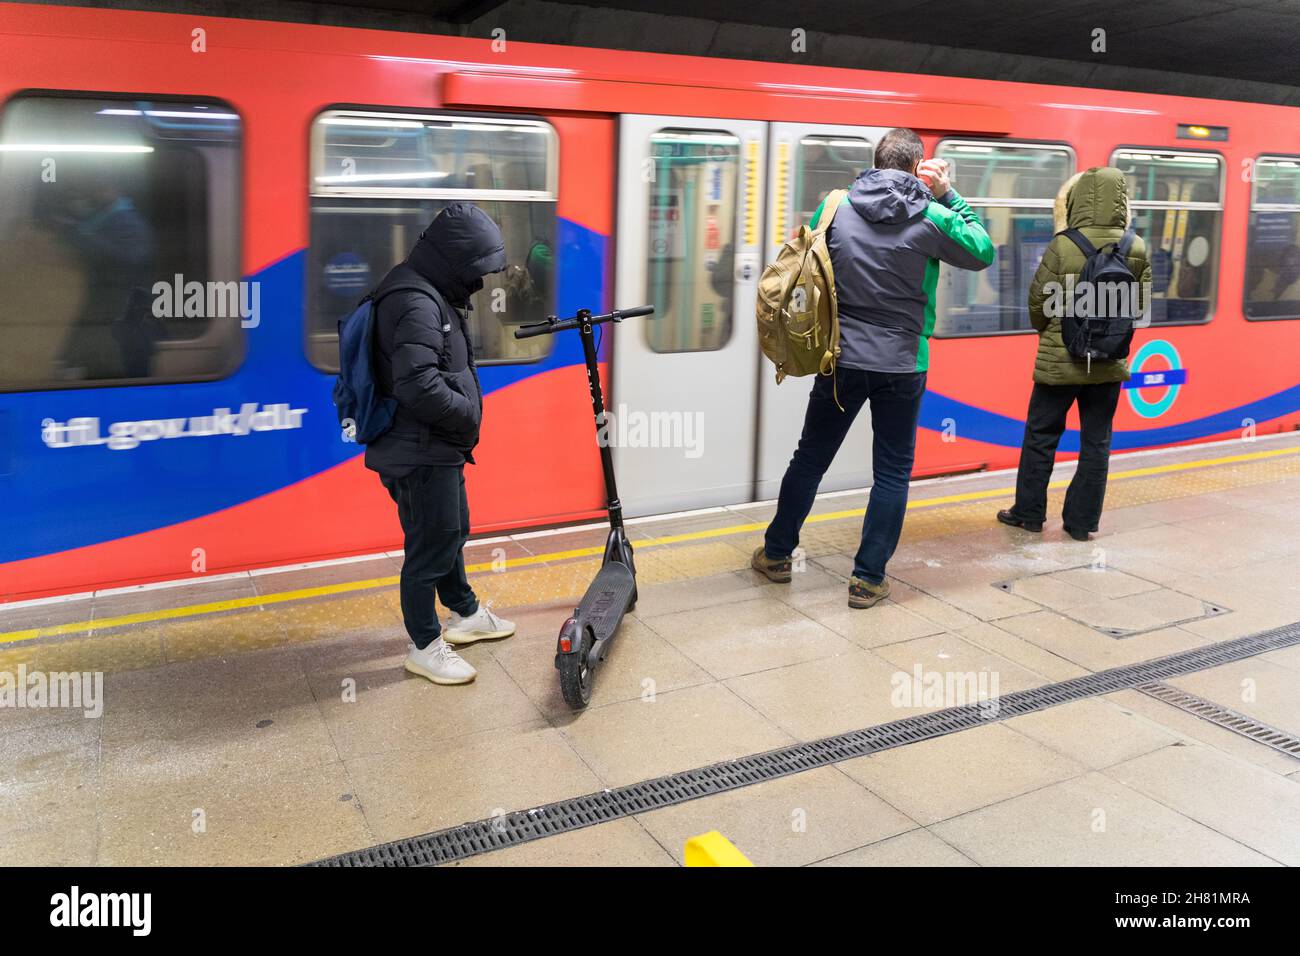 London, UK. 26th November 2021. Commuters about to board DLR train to work, when RMT go ahead with  24 hours strike action on five London underground lines, in a dispute over new shift patterns as the Night Tube service is due to resume this weekend. Credit: Xiu Bao/Alamy Live News Stock Photo